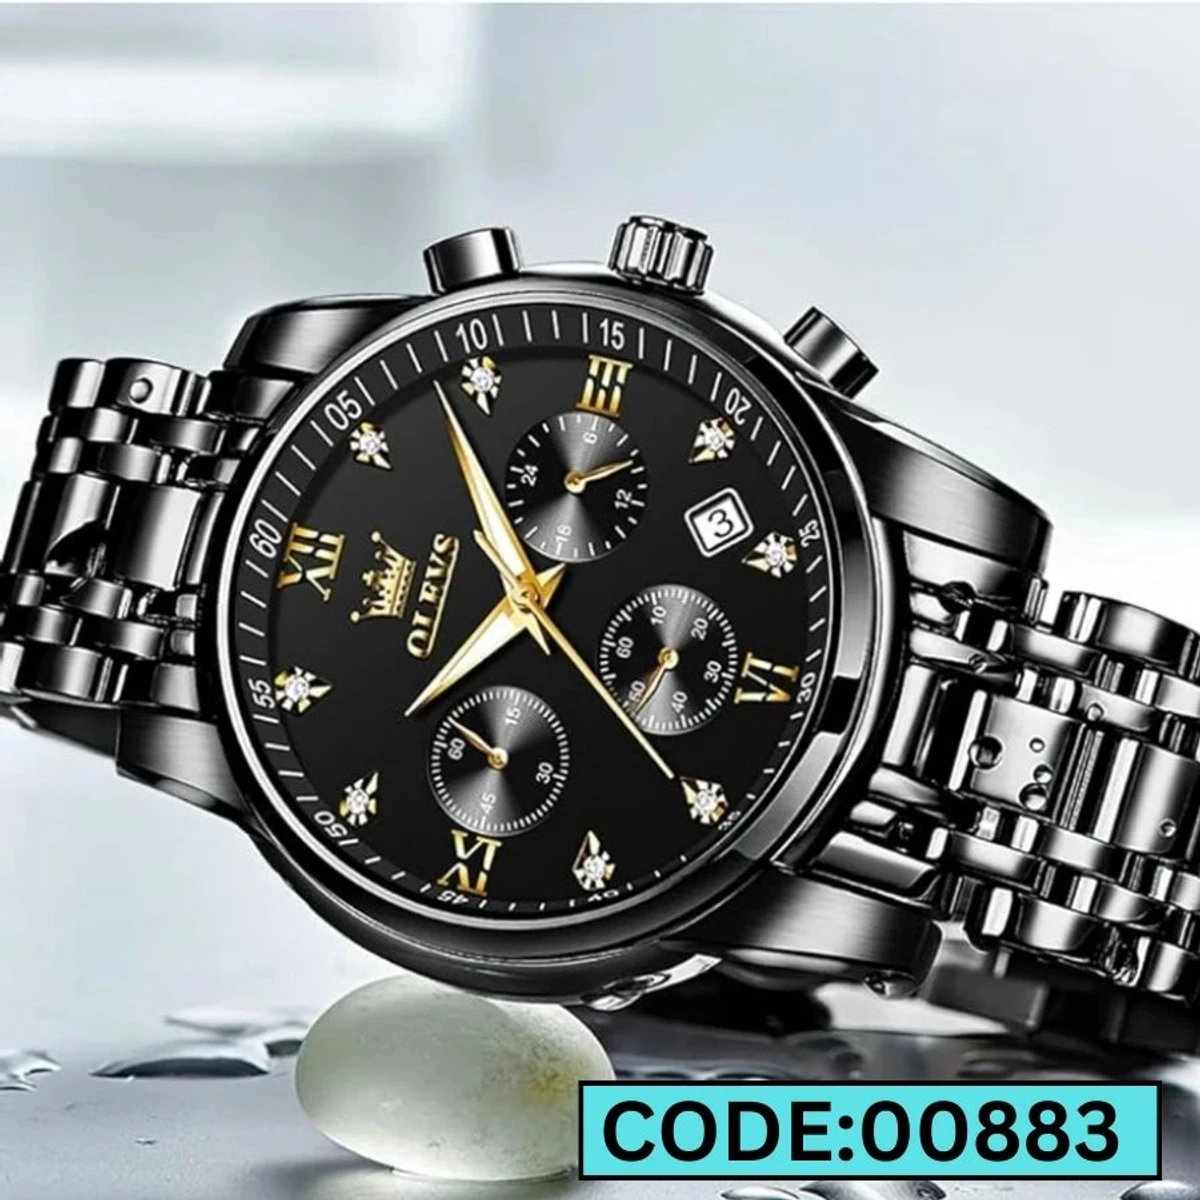 OLEVS MODEL 2858 Watch for Men Stainless Steel Watches - 2858 Full BLACK COOLER WATCH - MAN WATCH